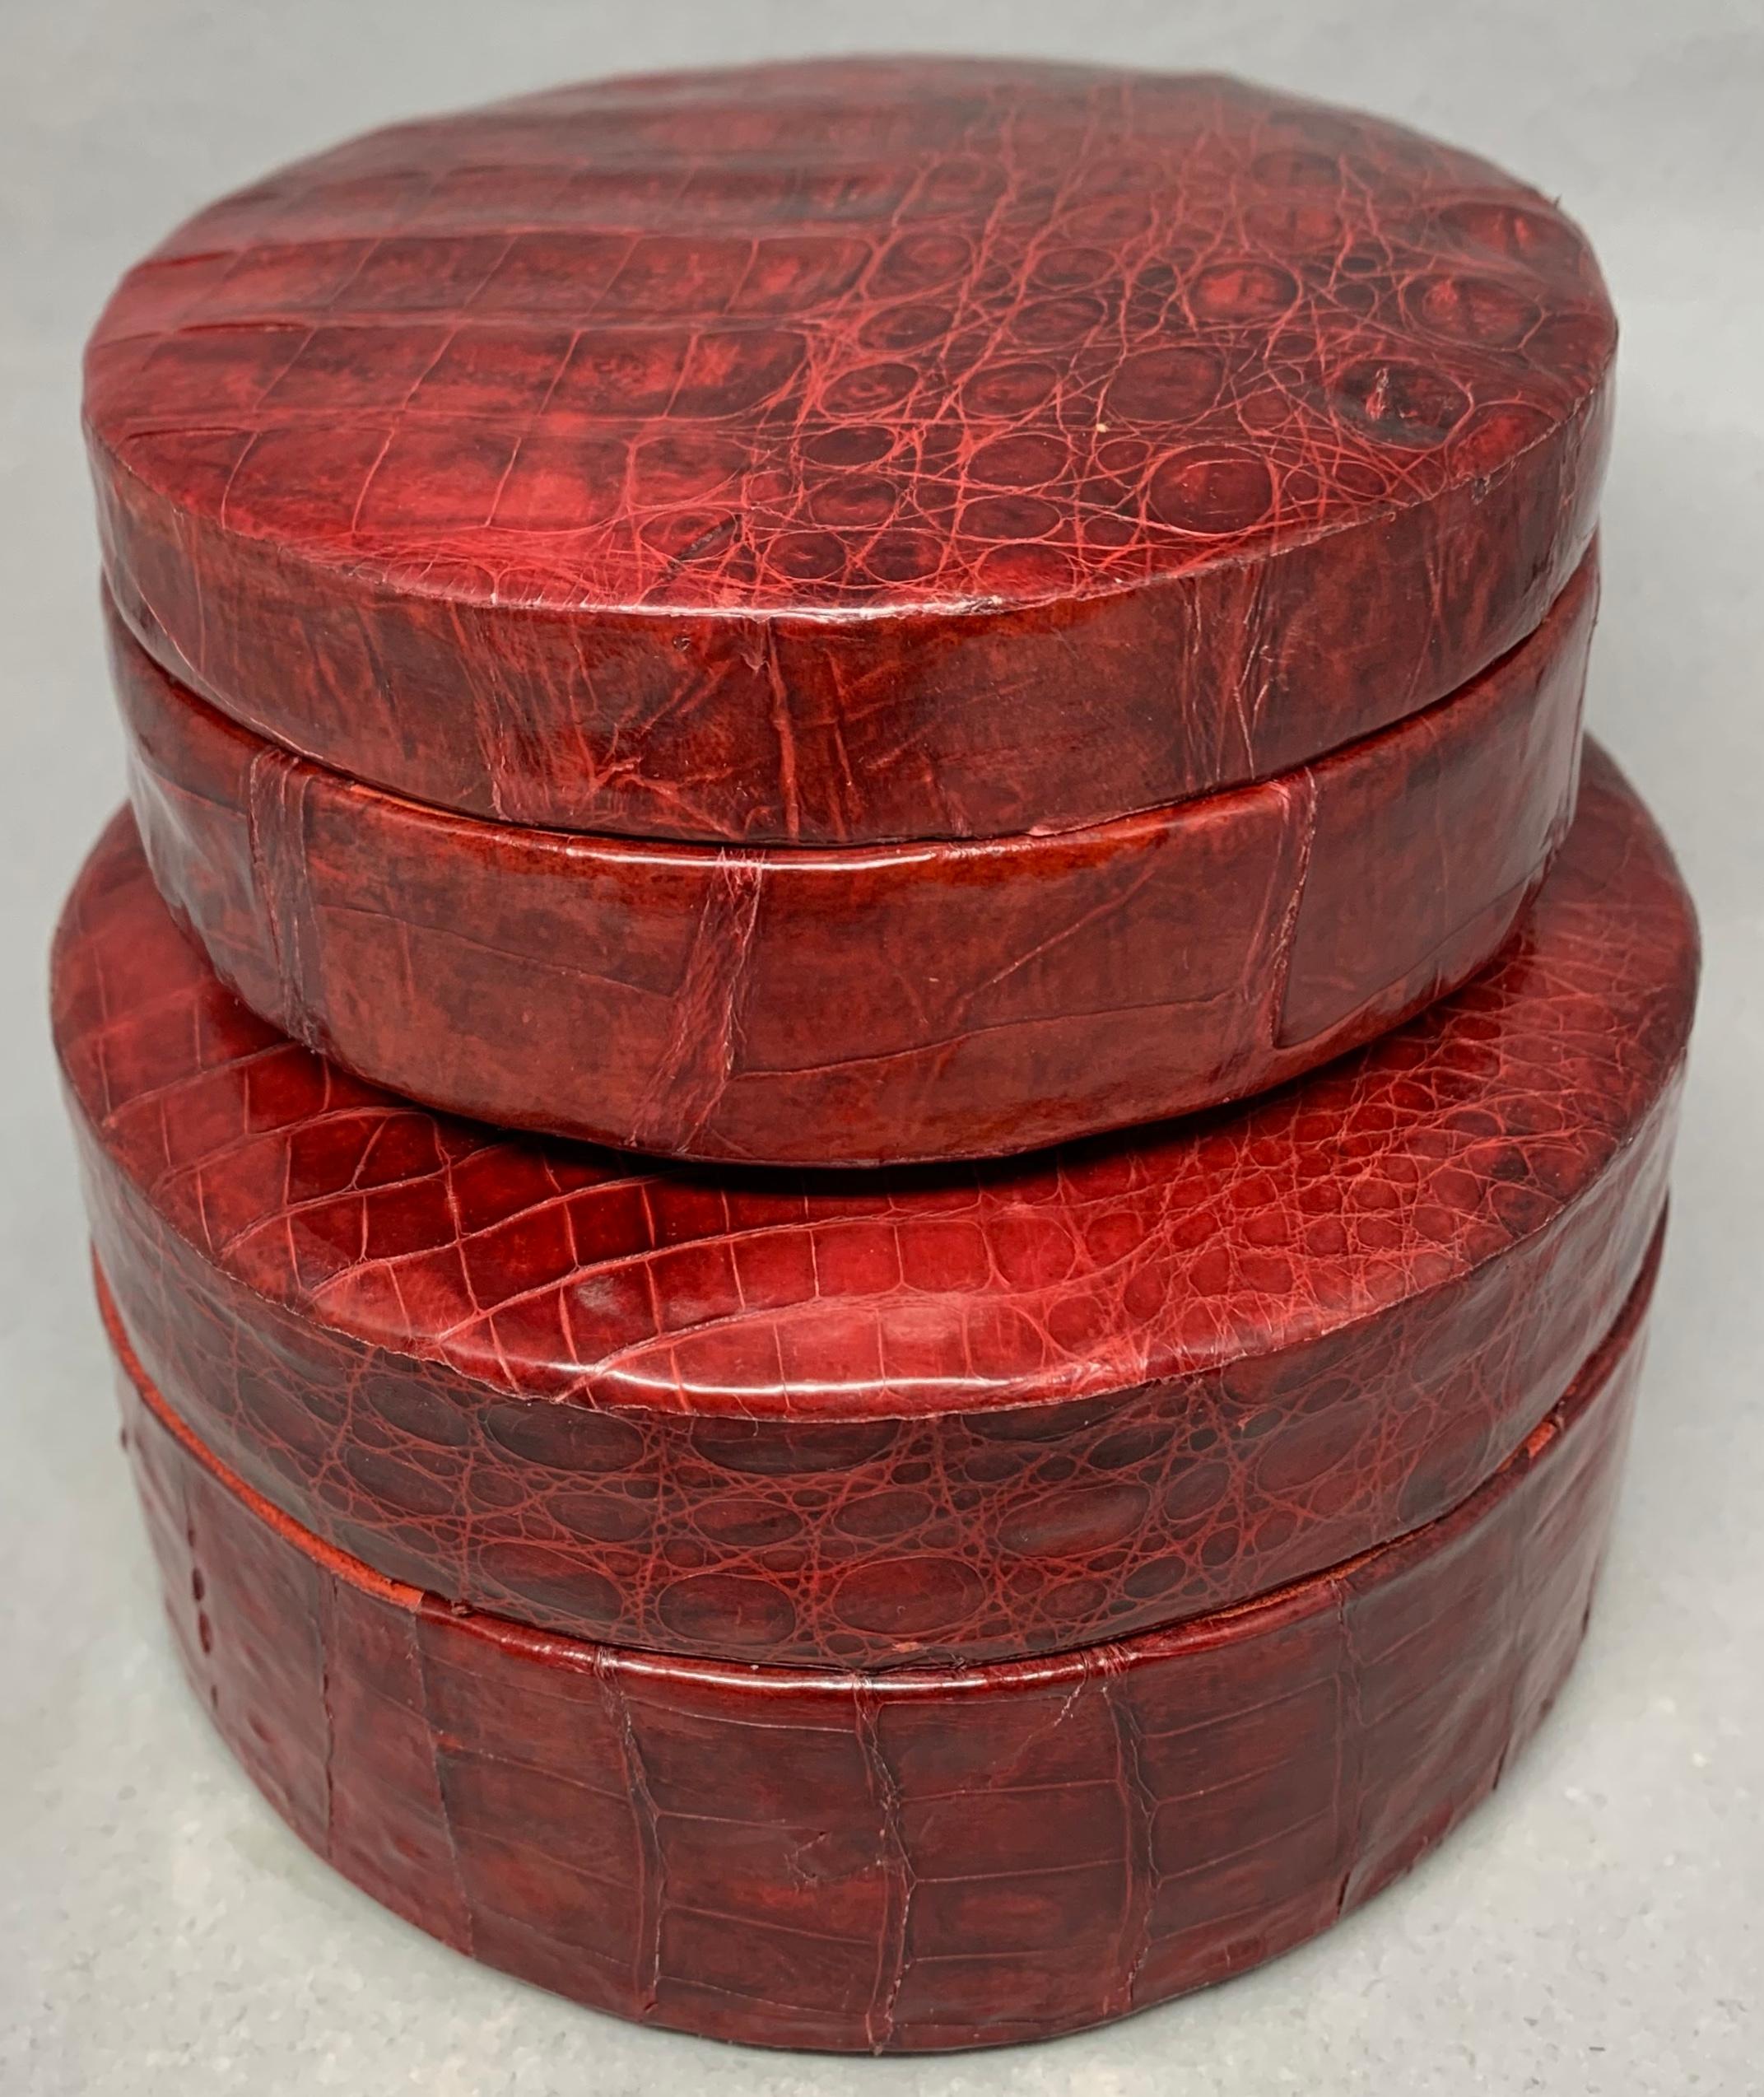 Pair red crocodile nesting boxes. Set of two vintage one of a kind rich carmine red crocodile leather handmade jewelry boxes nesting one inside the other with red velvet linings. Italy, circa 1970
Dimensions: Large box 5.25